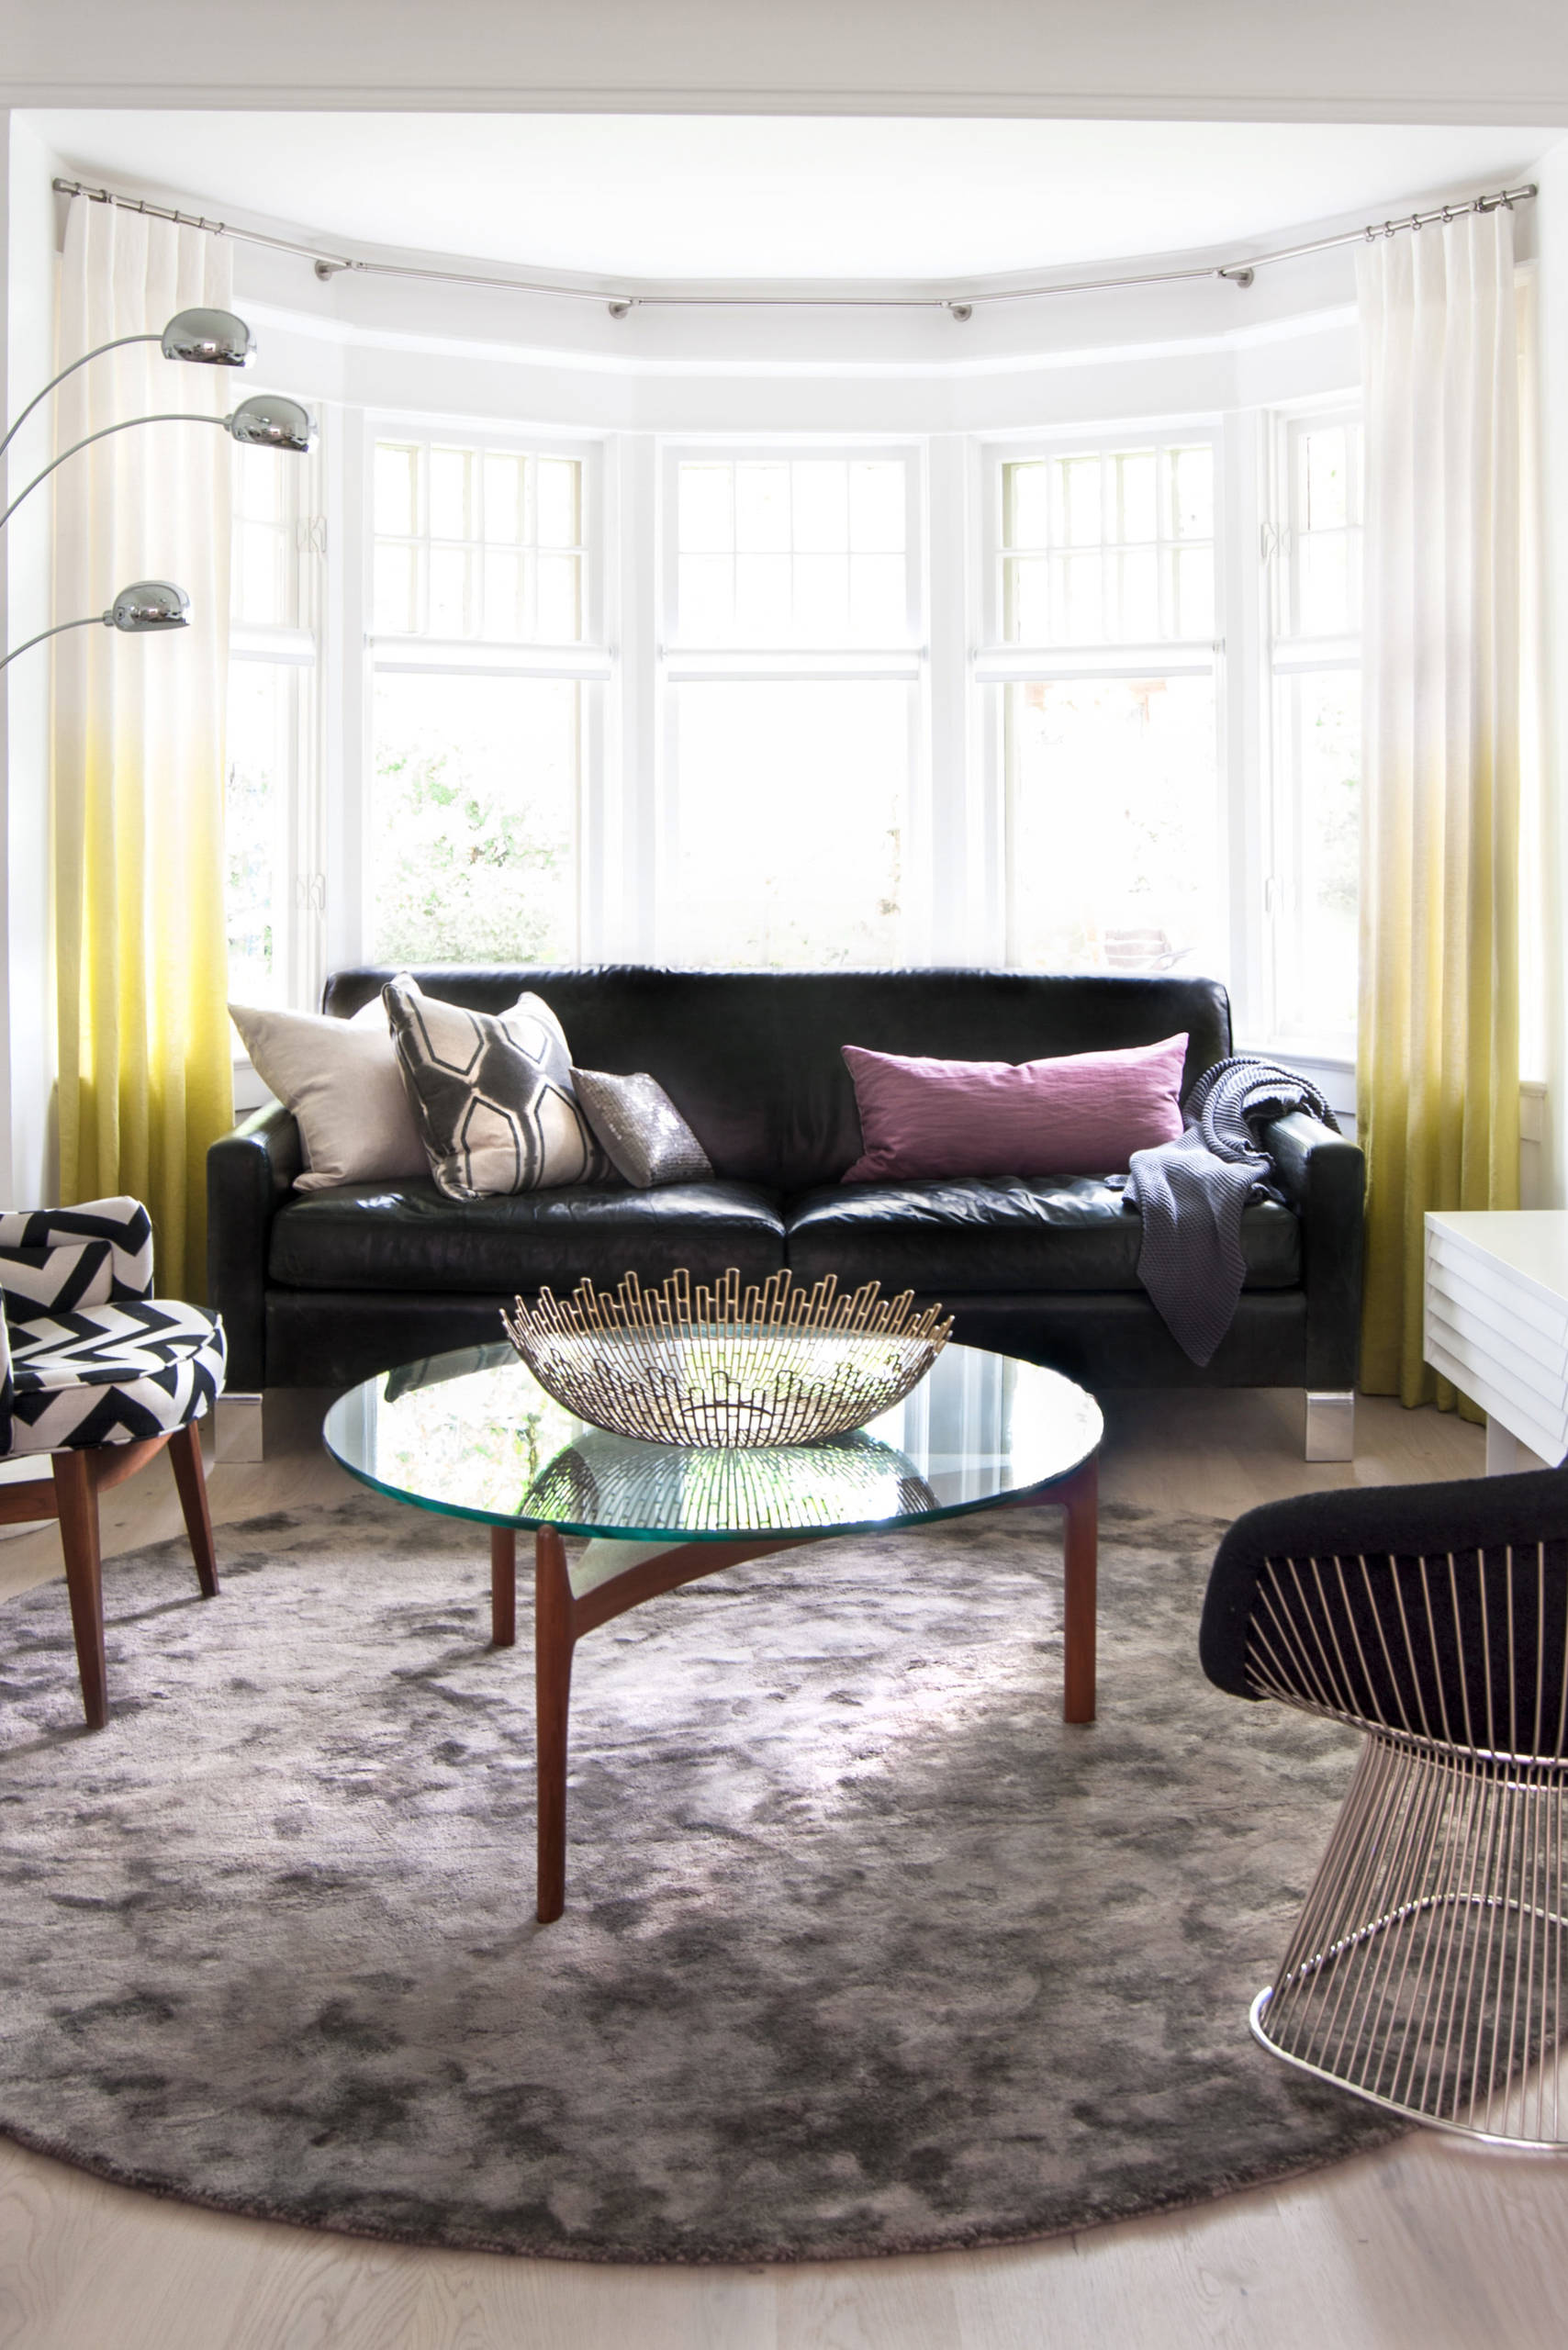 Come Around To The Idea Of A Round Rug, Round Rug Living Room